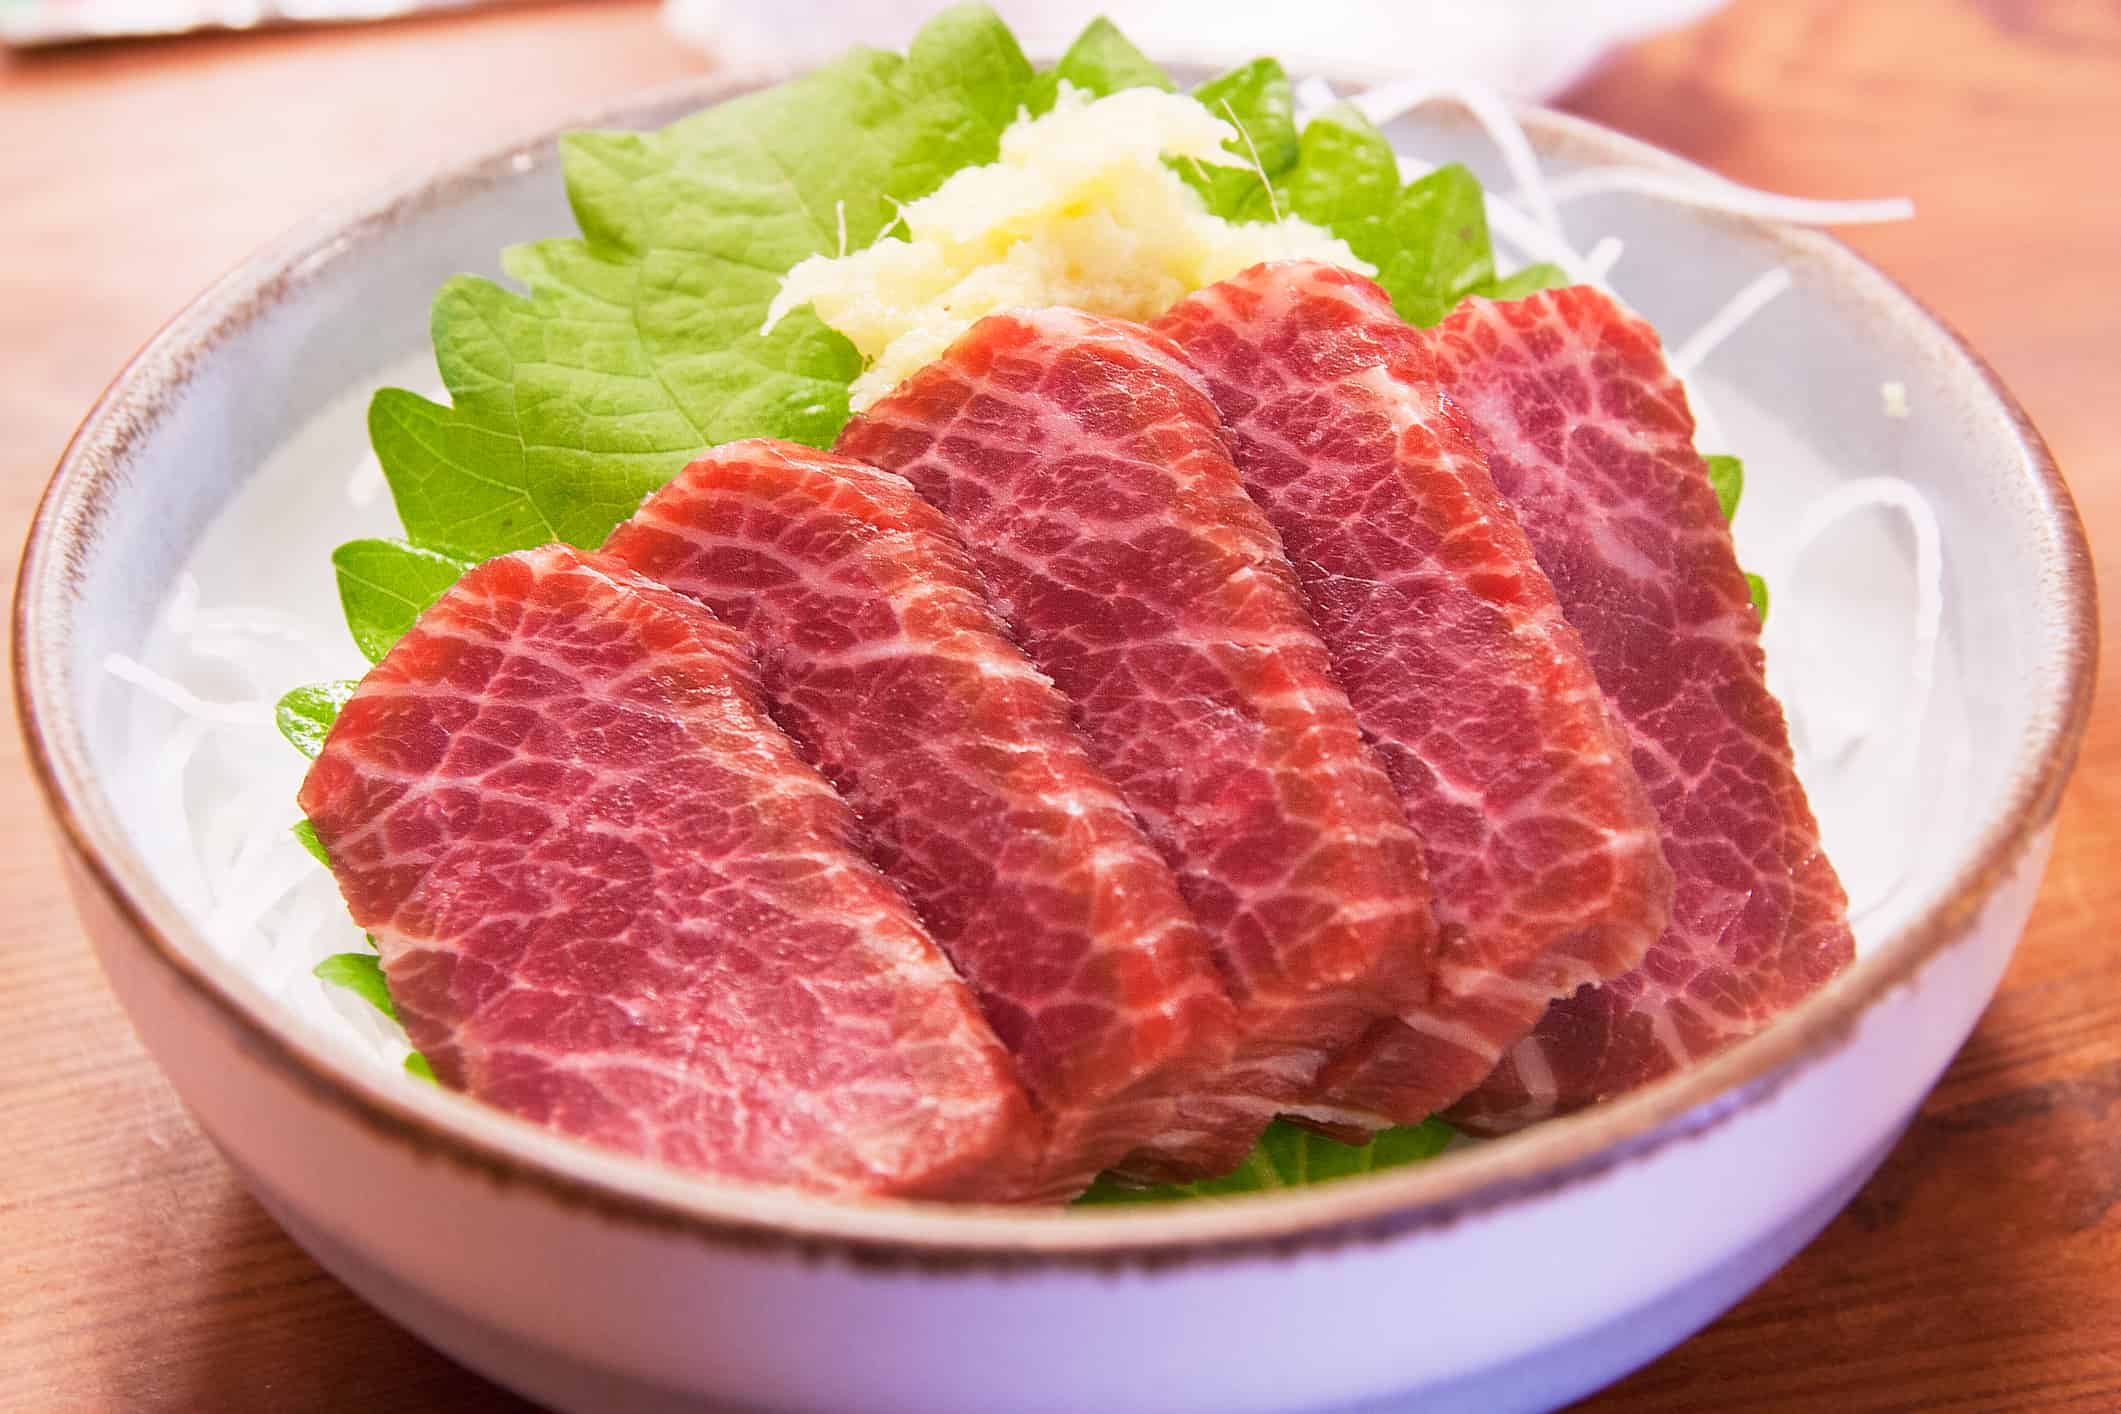 Horse sashimi is very delicious and popular